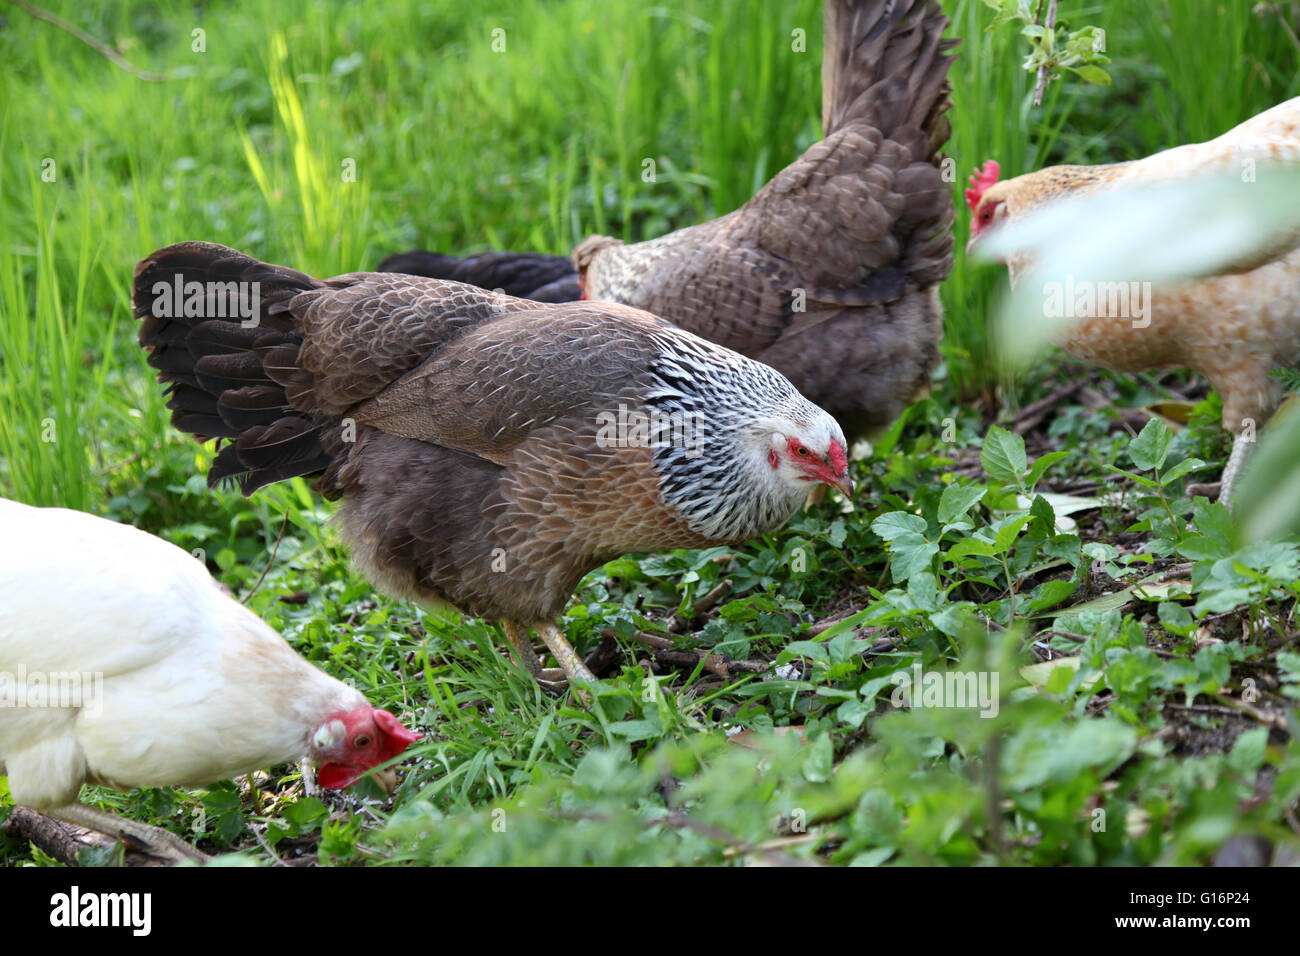 Several colourful free-range chickens looking for food in an orchard Stock Photo